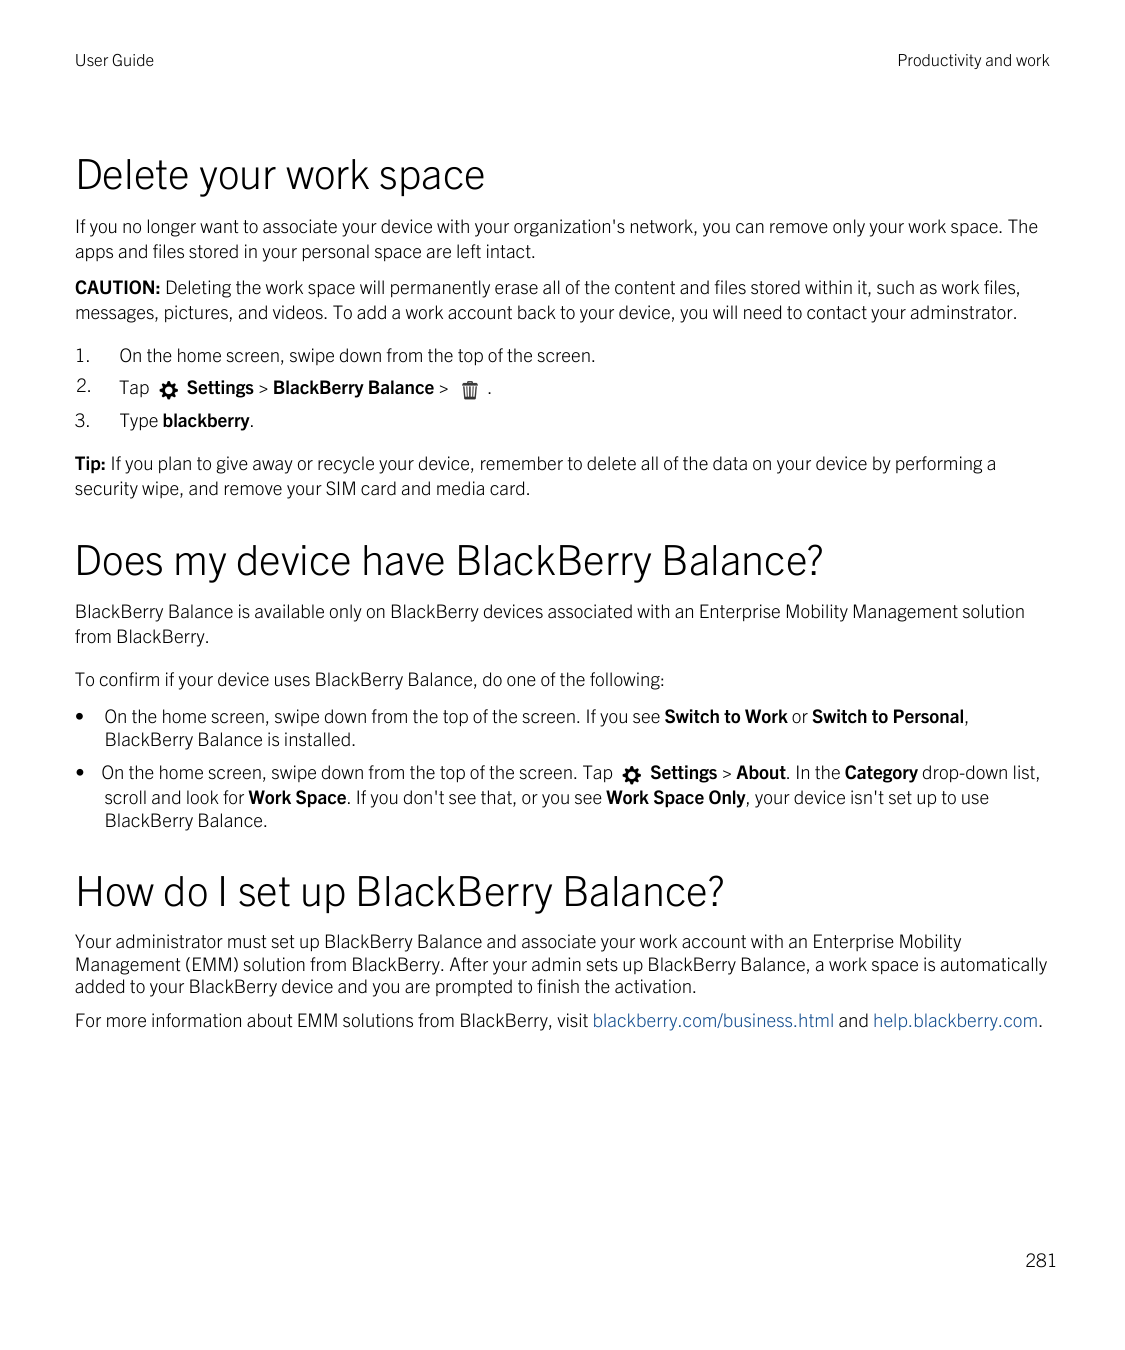 User GuideProductivity and workDelete your work spaceIf you no longer want to associate your device with your organization's net